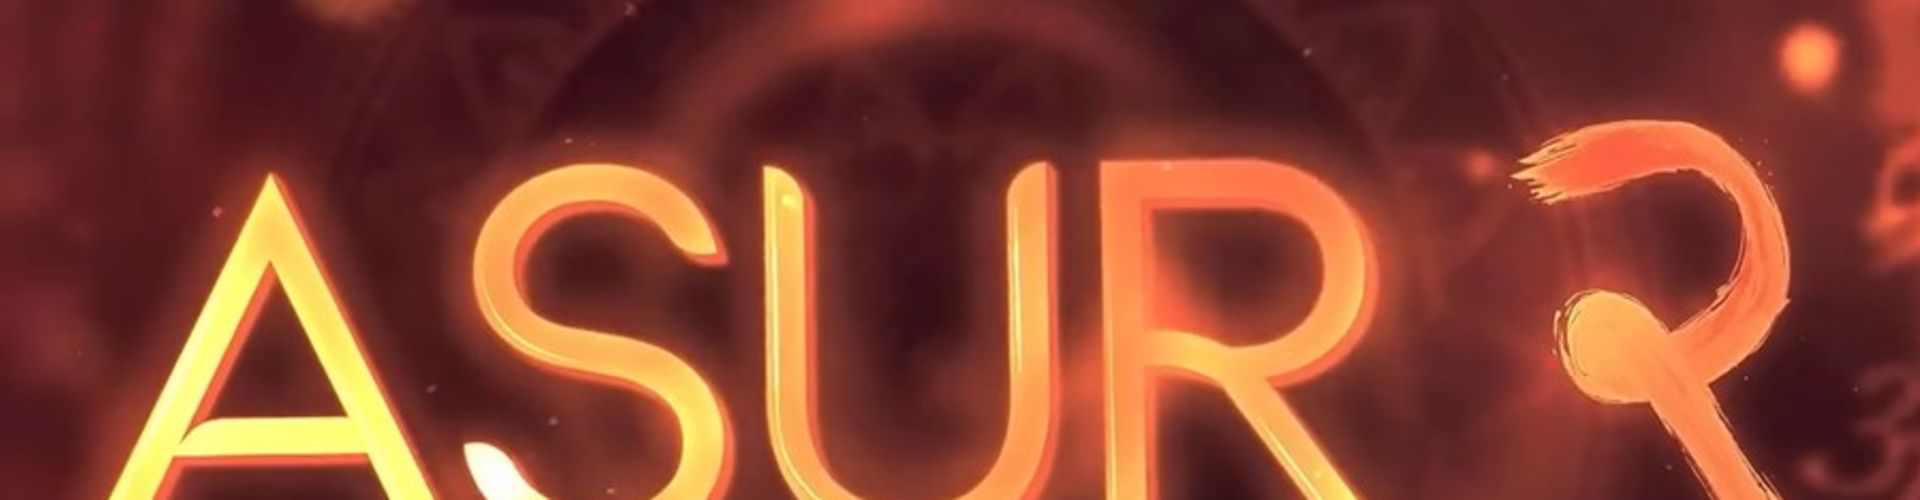 Asur 2 Trailer Is Out, Arshad Warsi And Barun Sobti Are Hunting A Fanatic